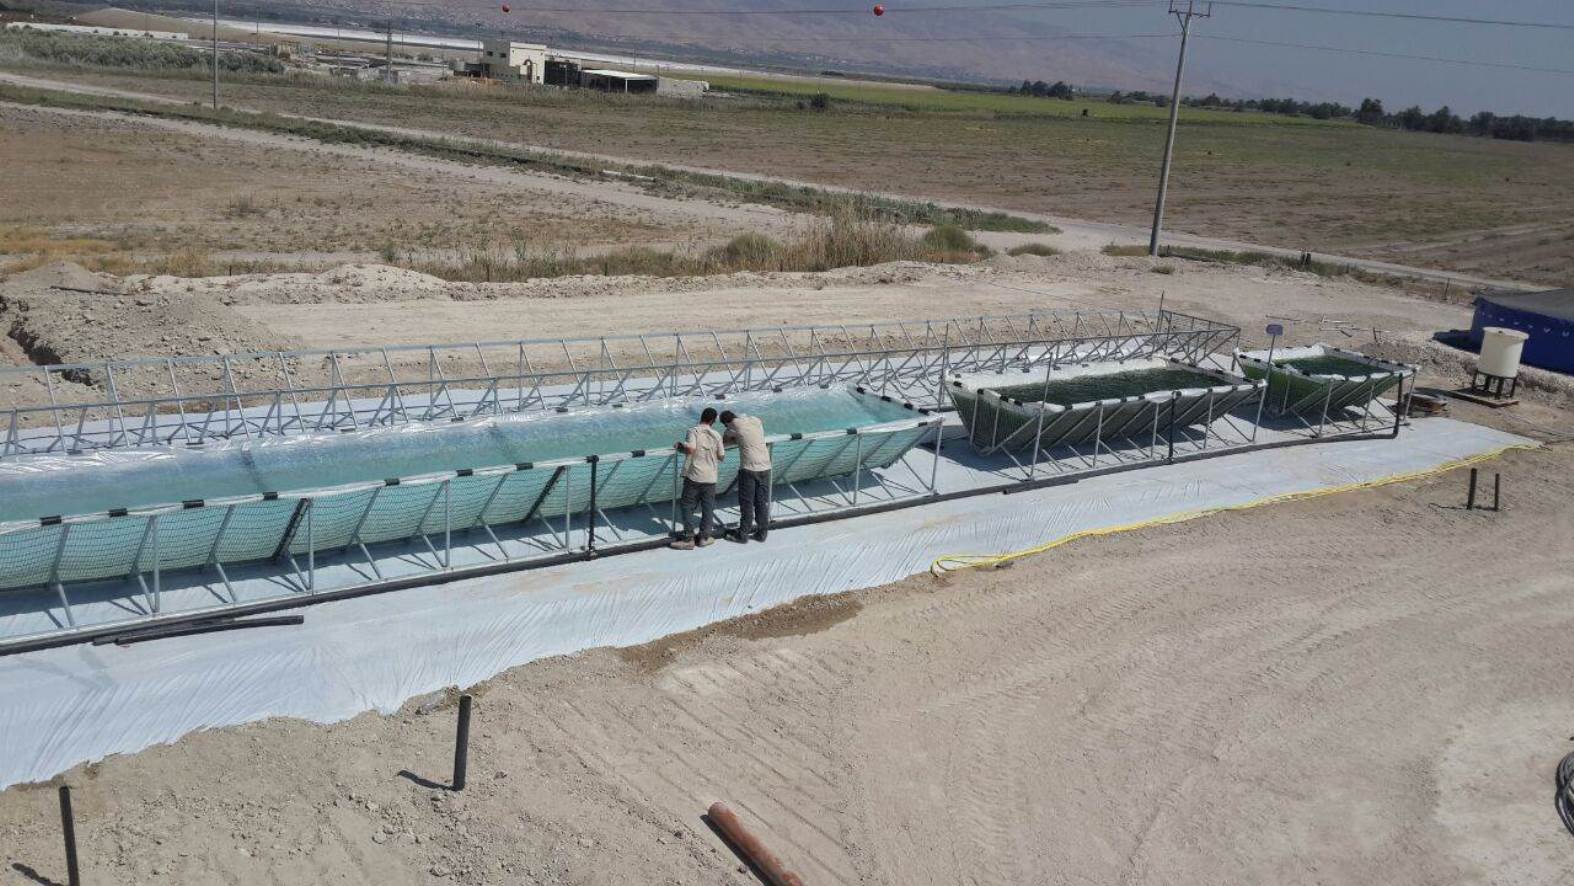 Univerve’s microalgae farm under construction in the Beit She’an Valley. Photo: courtesy